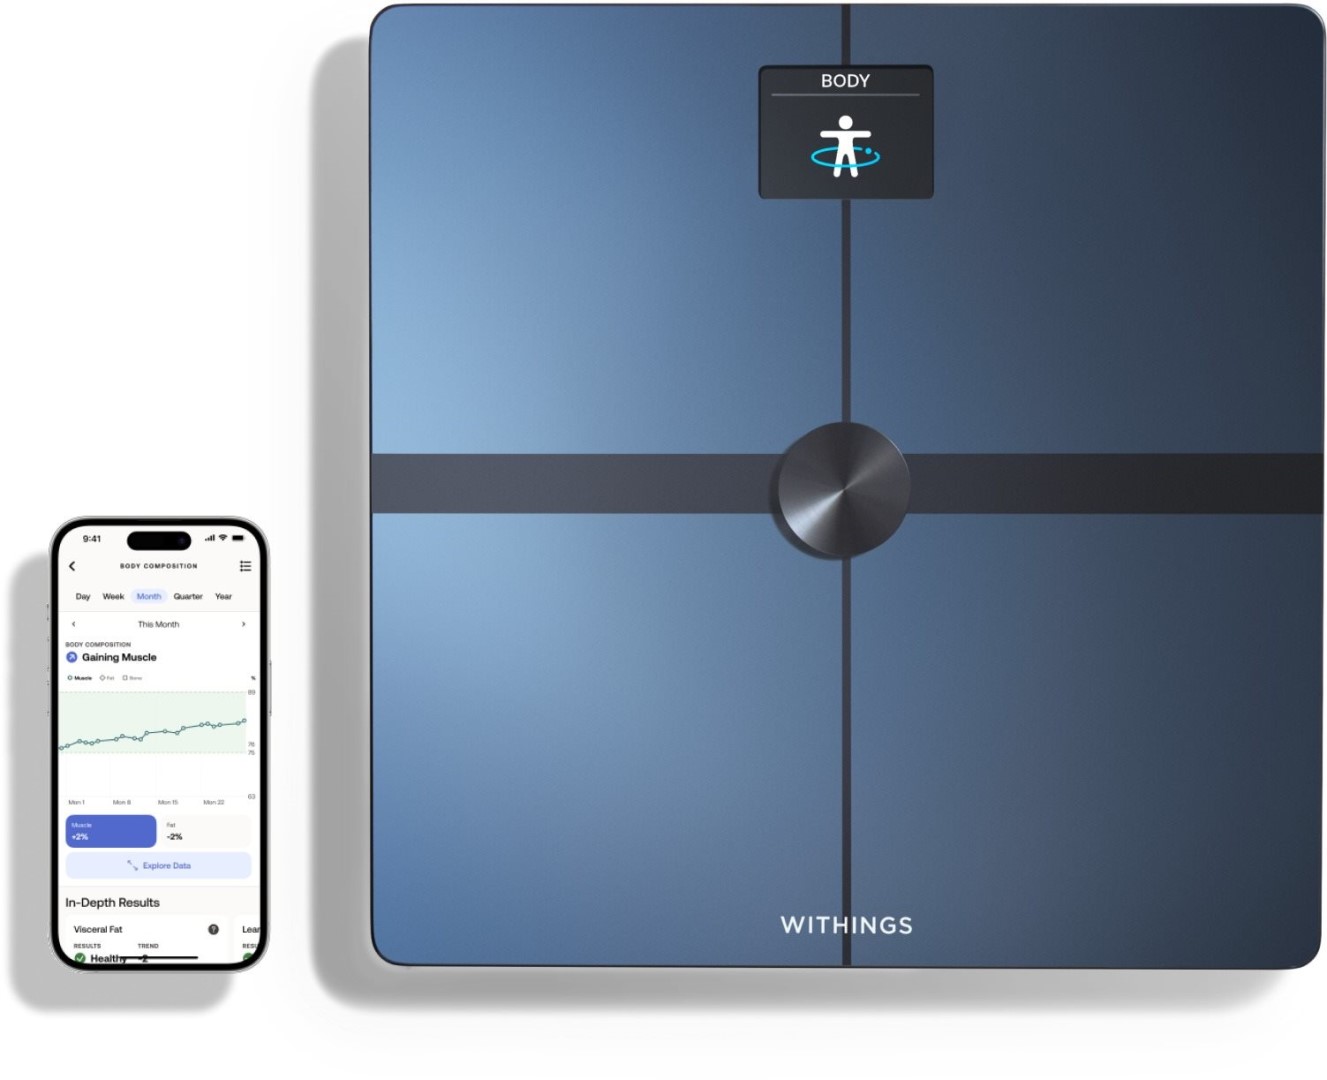 https://cdn.bscom.cz/images/0/e52872f0df1396be/2/withings-body-smart-advanced-body-composition-wi-fi-scale-black.jpg?hash=488245943